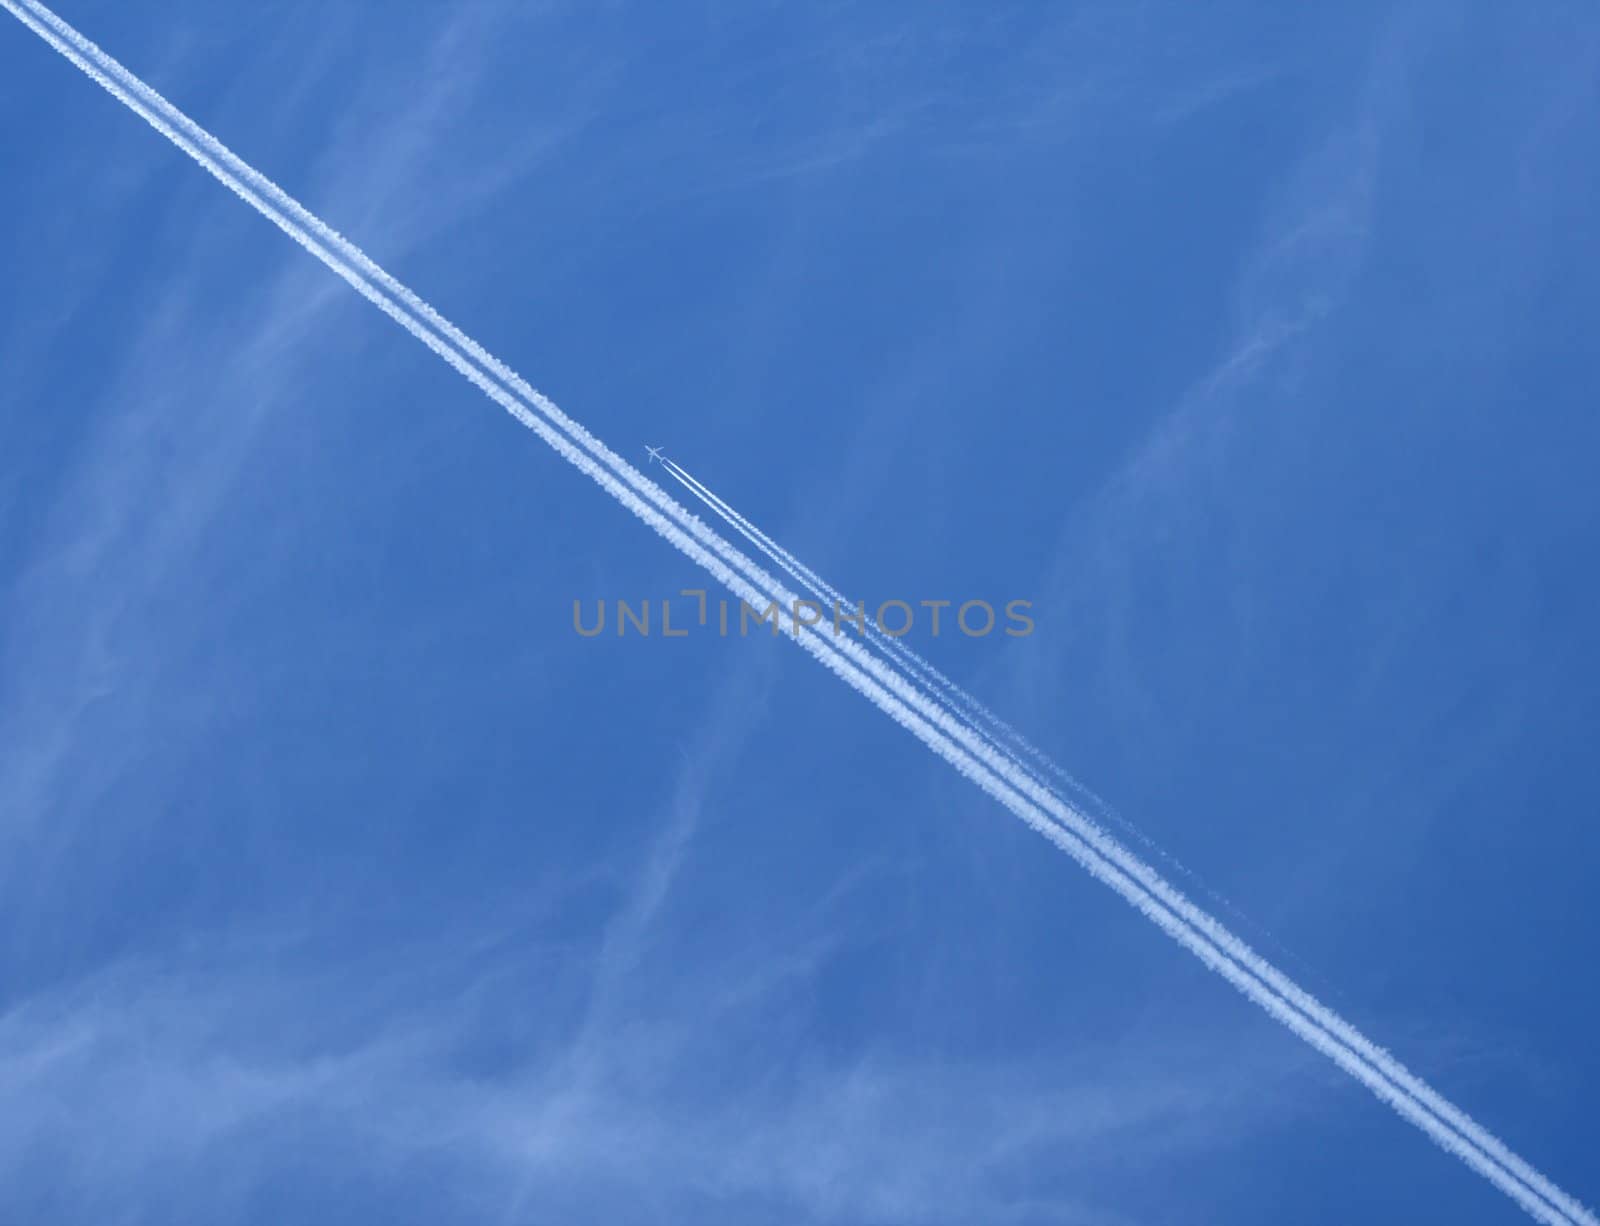 Trace of a jet airplane crossing the sky, and another plane flying near it.